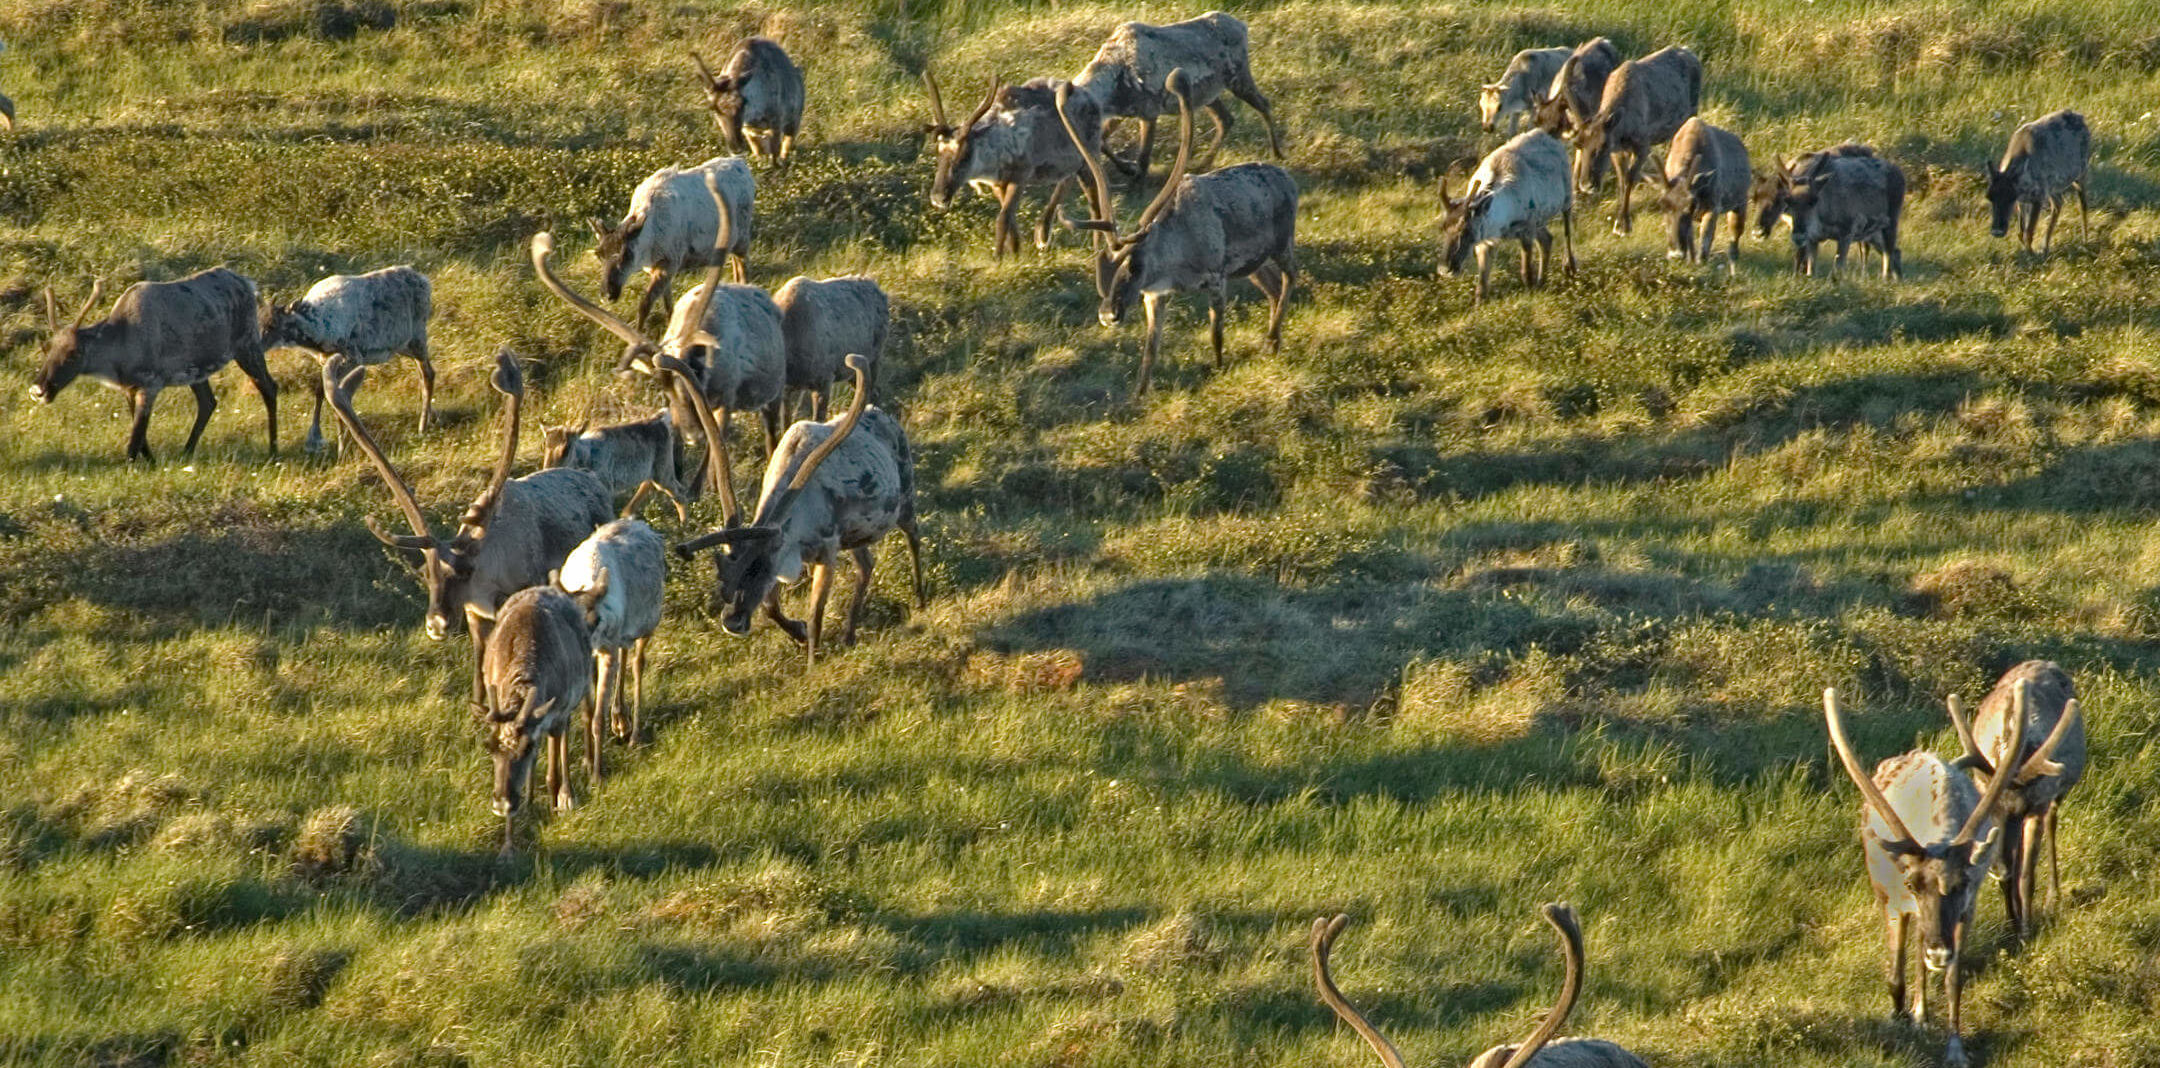 CARIBOU CALVING AREAS - Herd of barren-ground Caribou at Back River